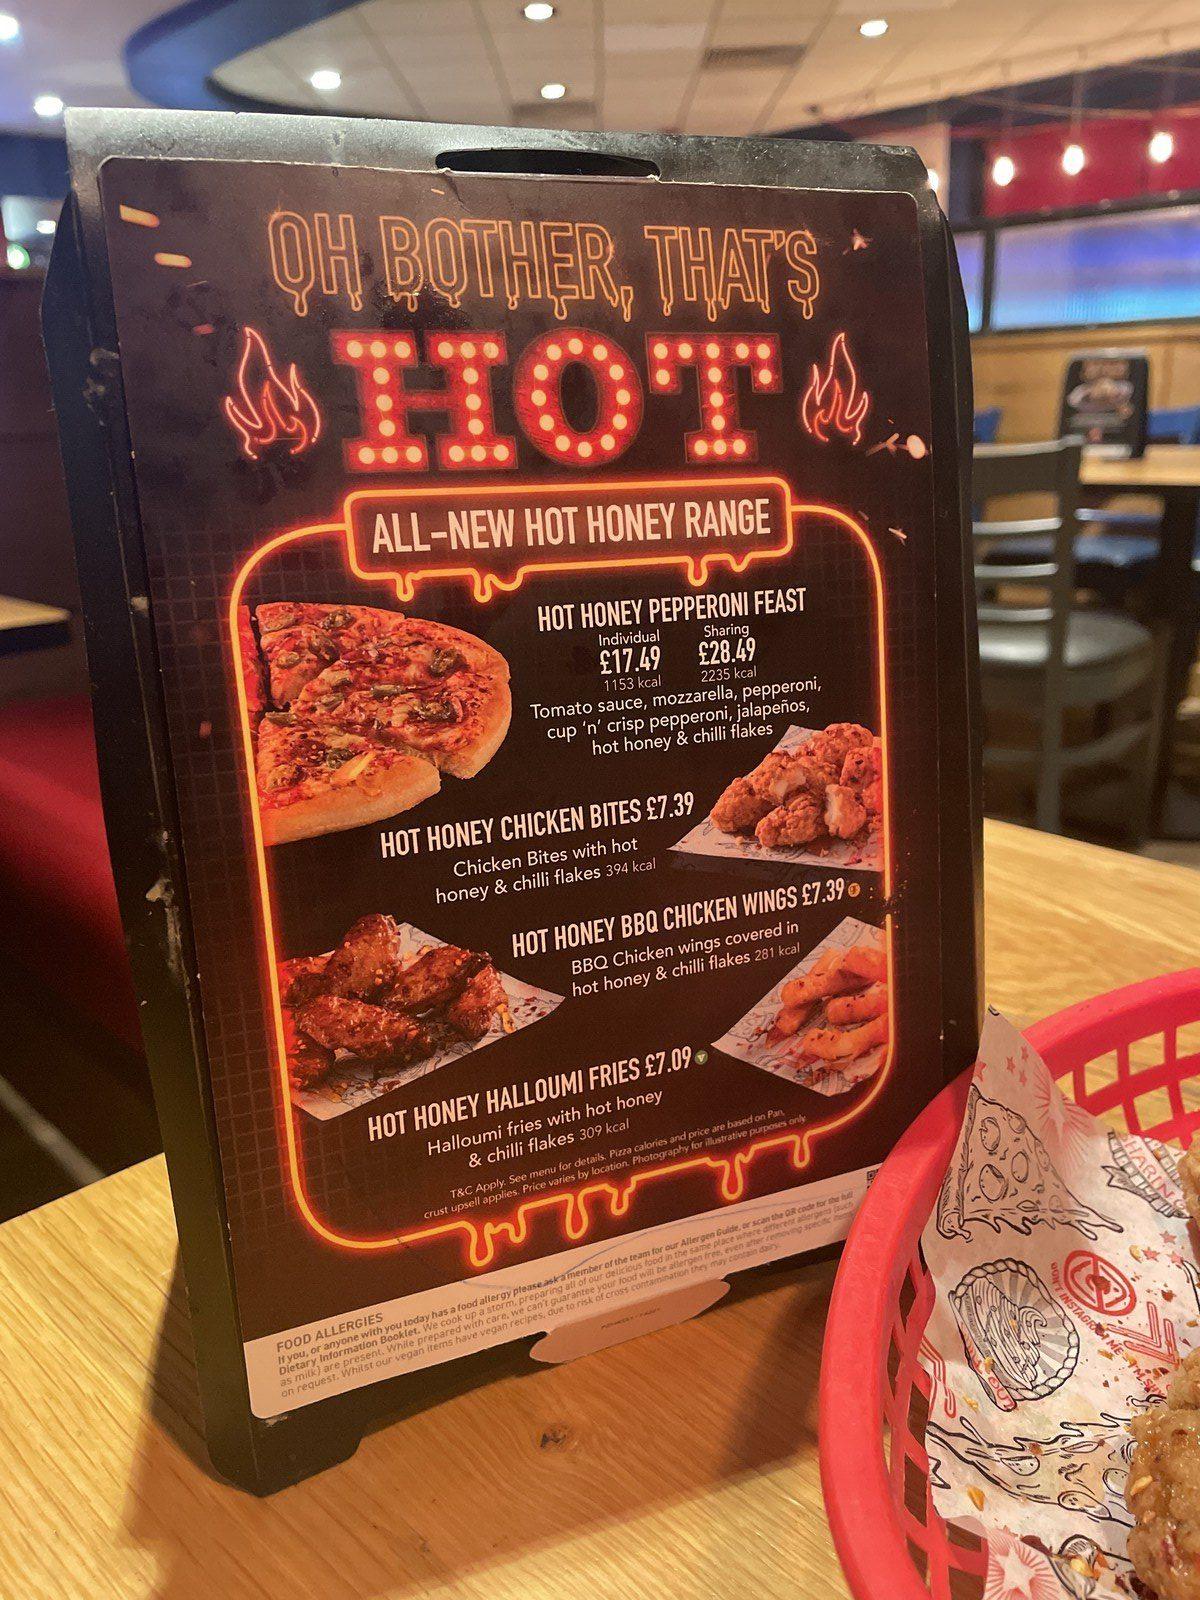 A placard advertising hot honey pizzas, wings, and halloumi fries at Pizza Hut